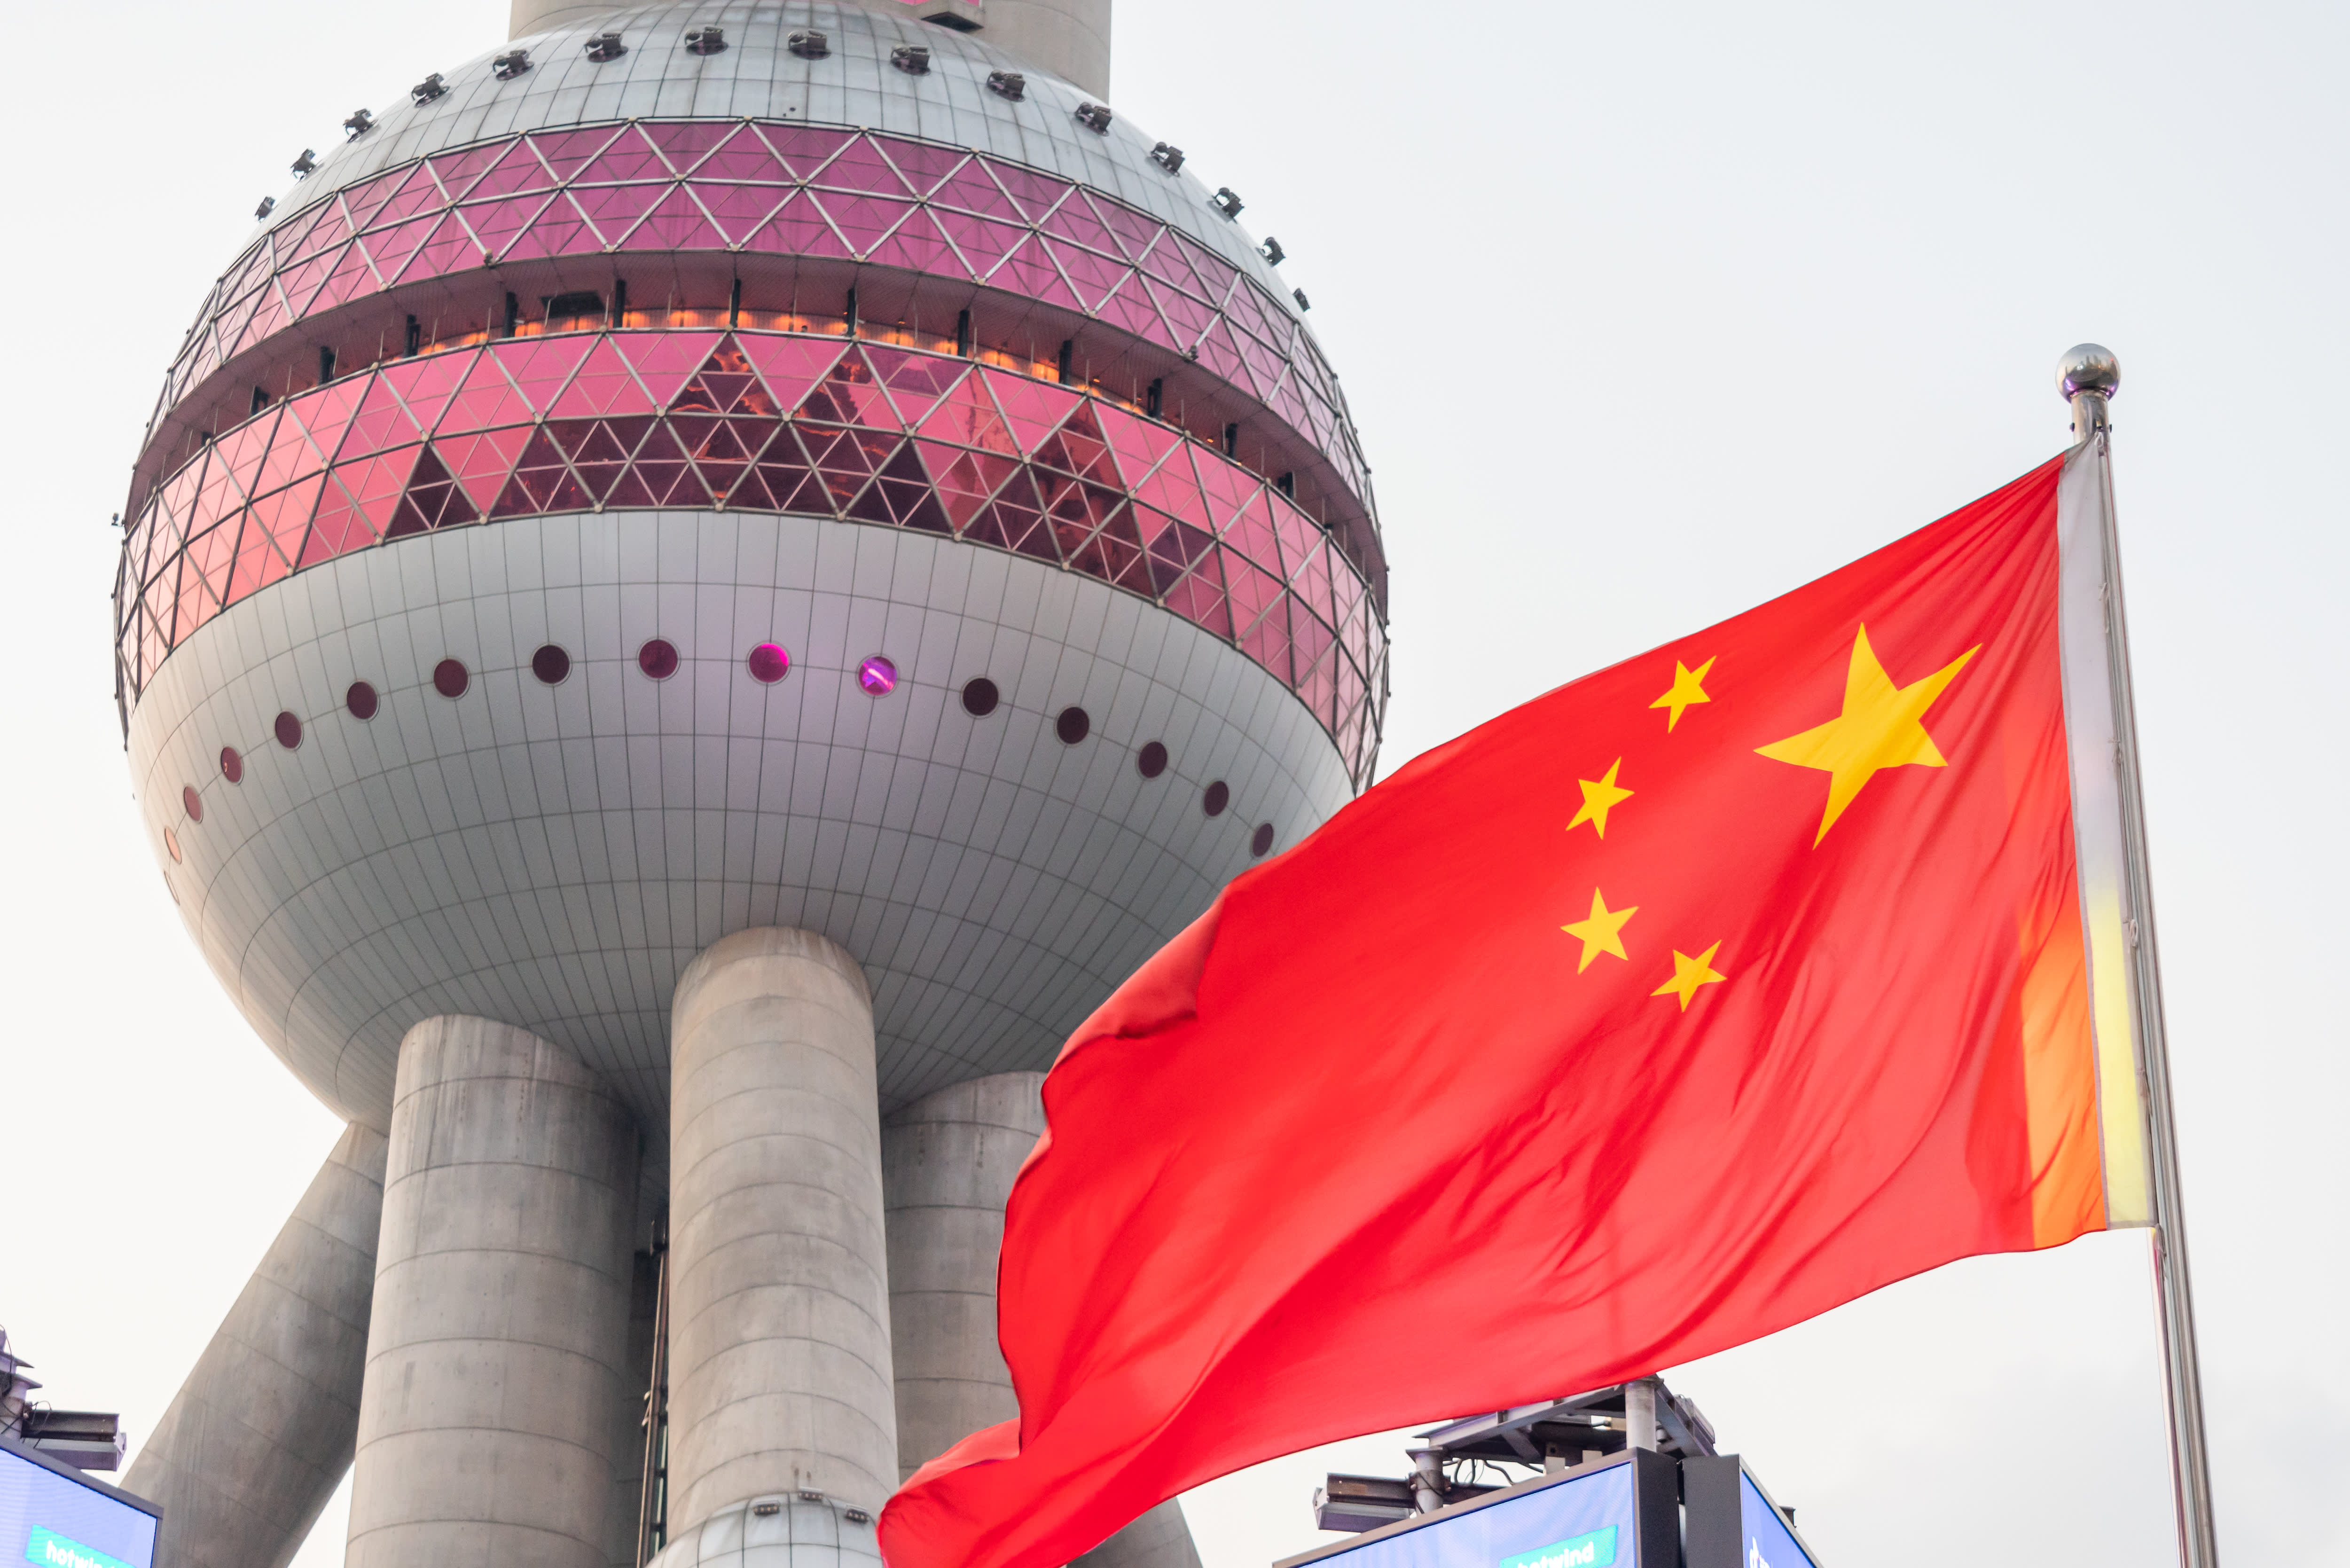 China has a good chance of doubling GDP by 2035, says Bank of America